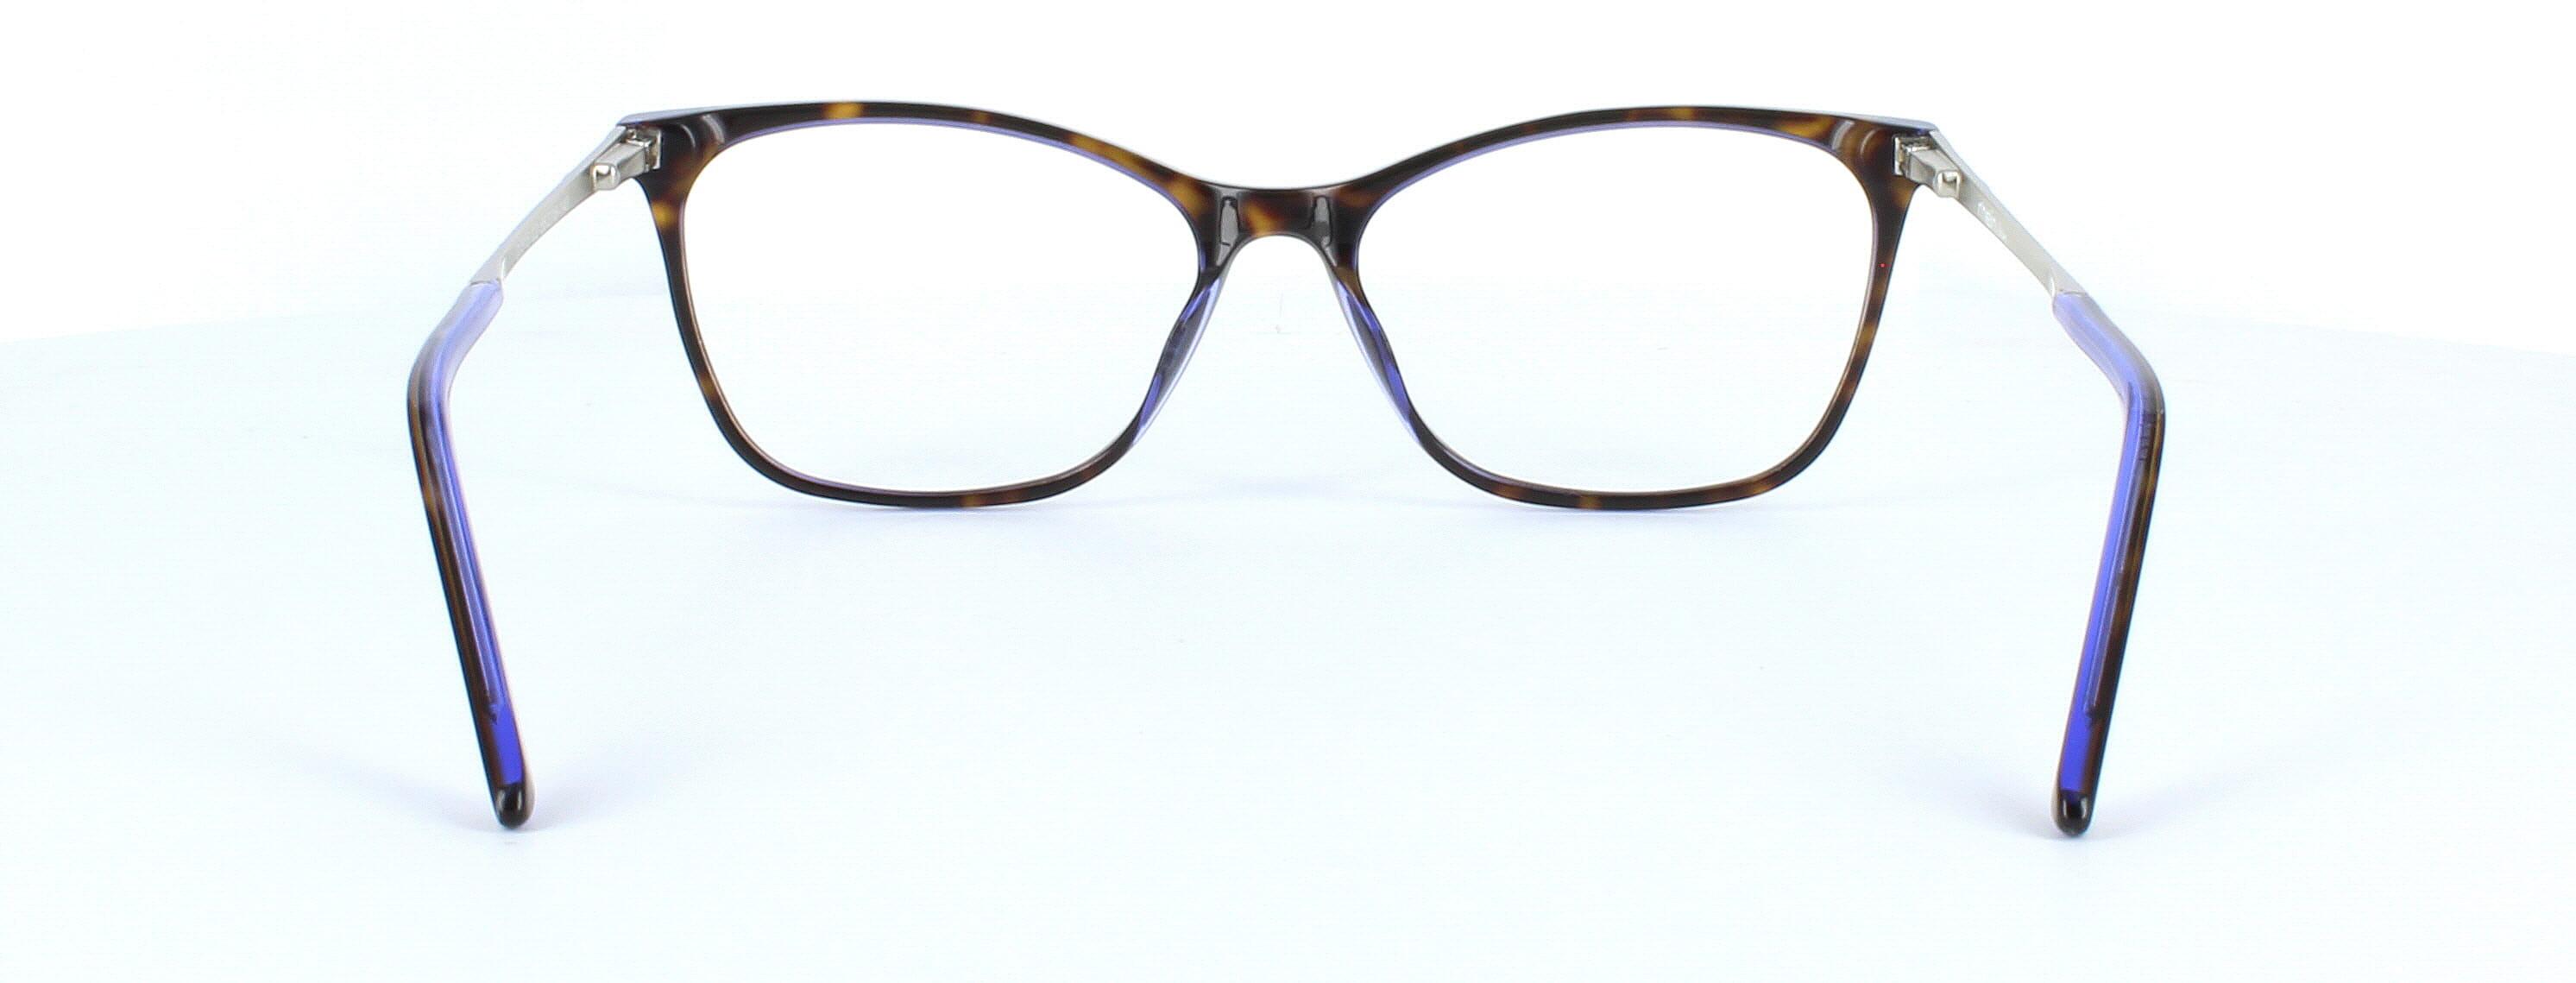 Bellina - ladies acetate glasses here in tortoise with crystal purple reverse - image view 3